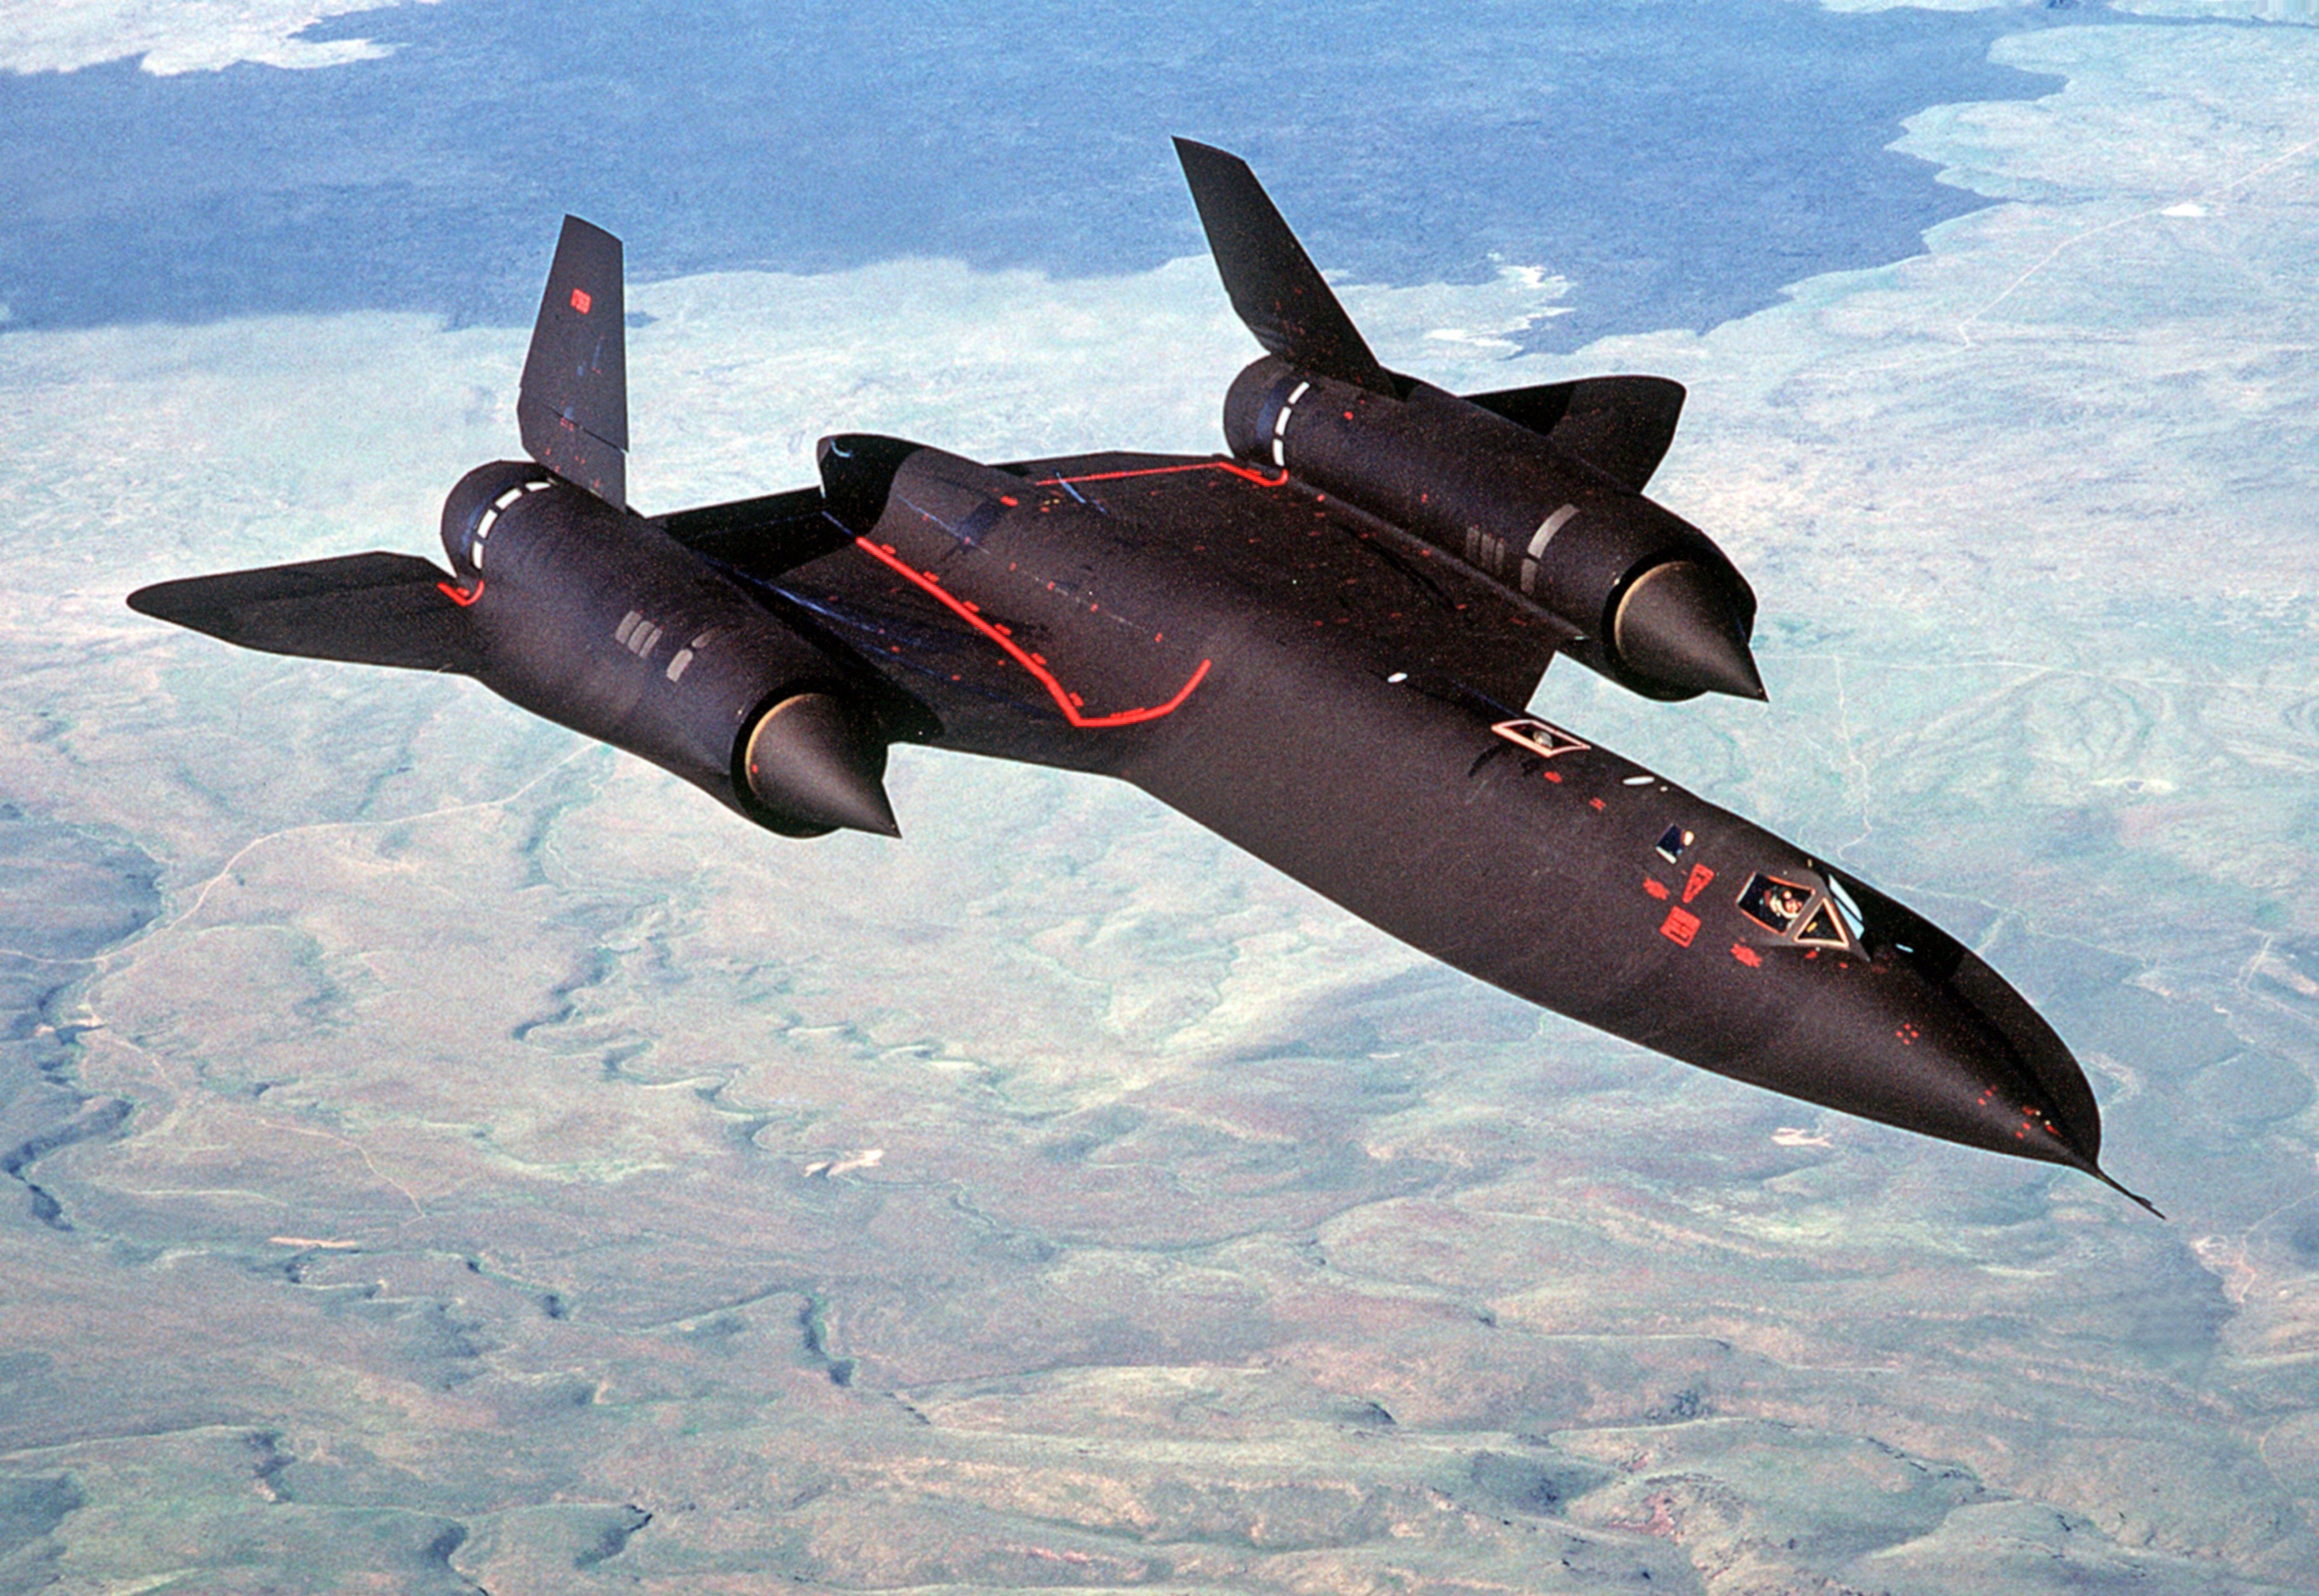 What It Was Like to Fly the SR-71 Blackbird